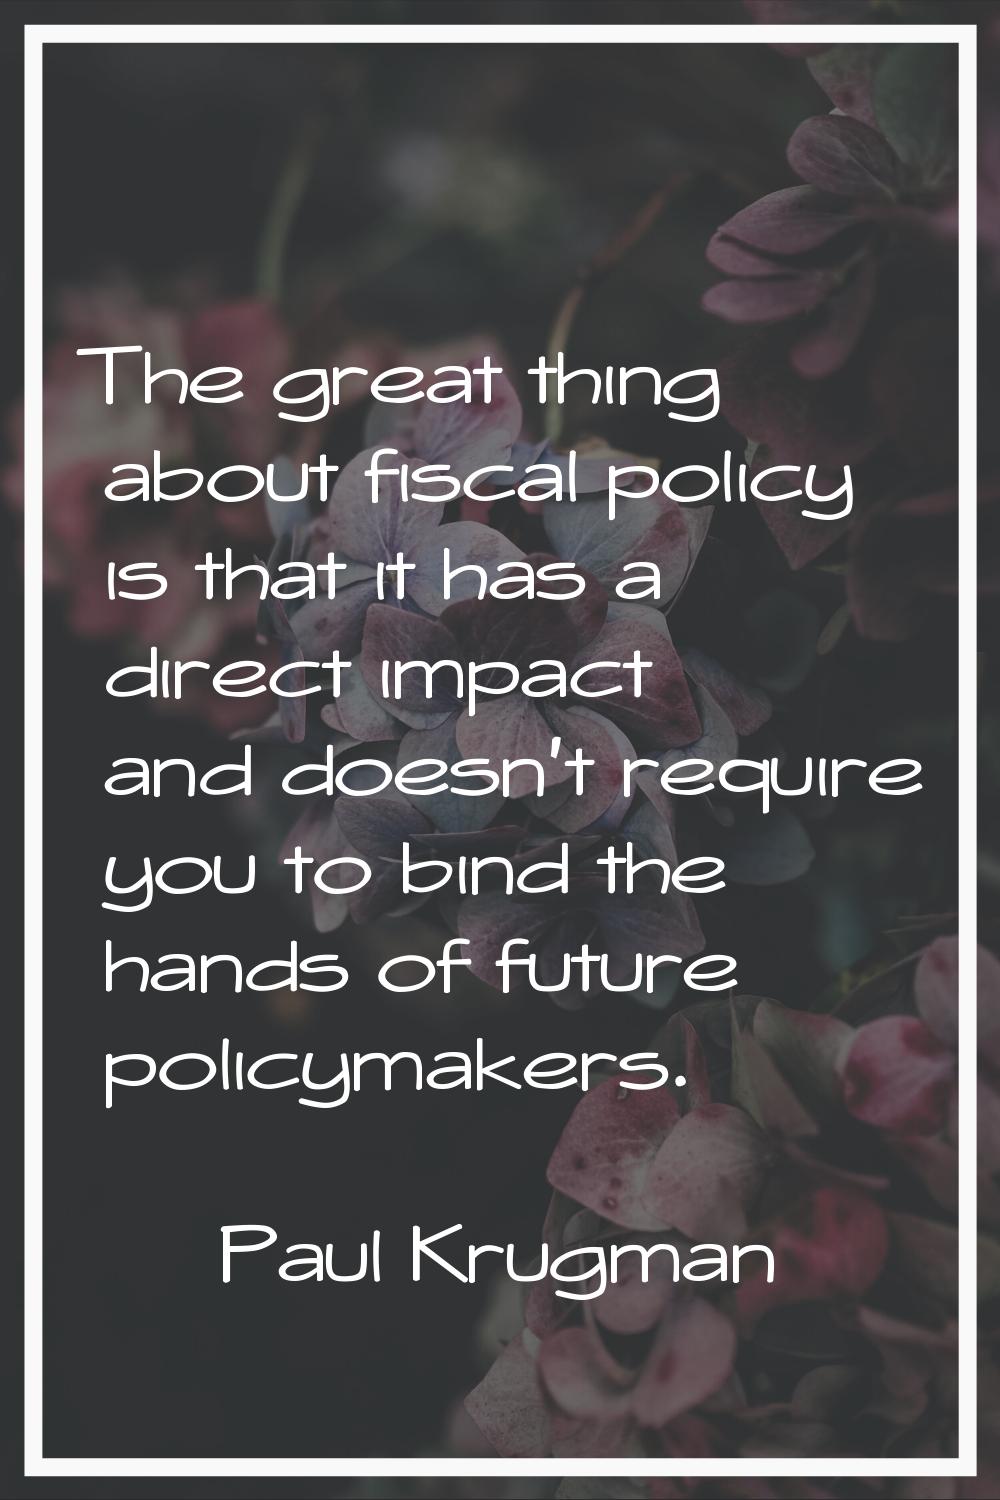 The great thing about fiscal policy is that it has a direct impact and doesn't require you to bind 